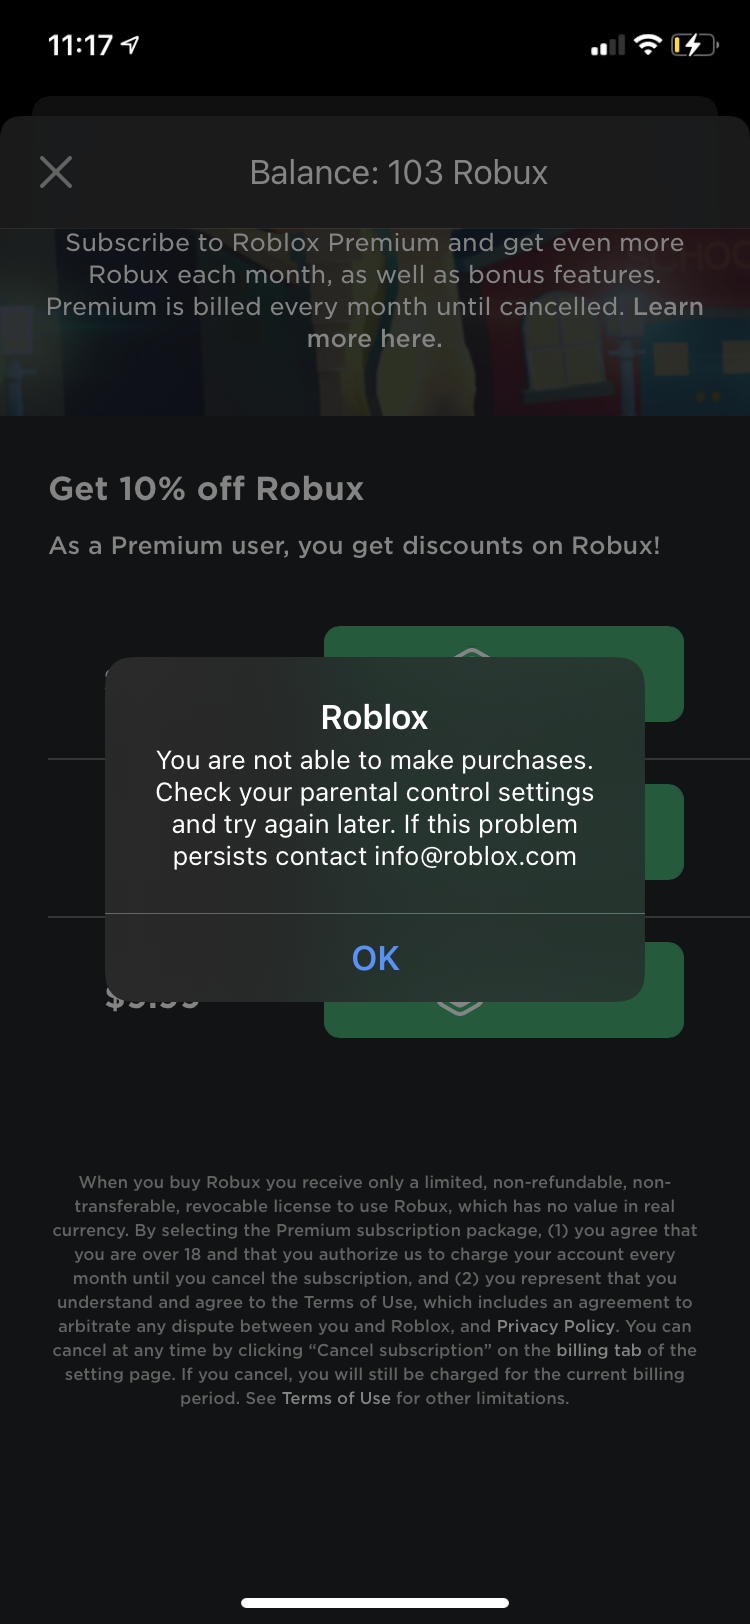 How to Use Roblox Parental Controls